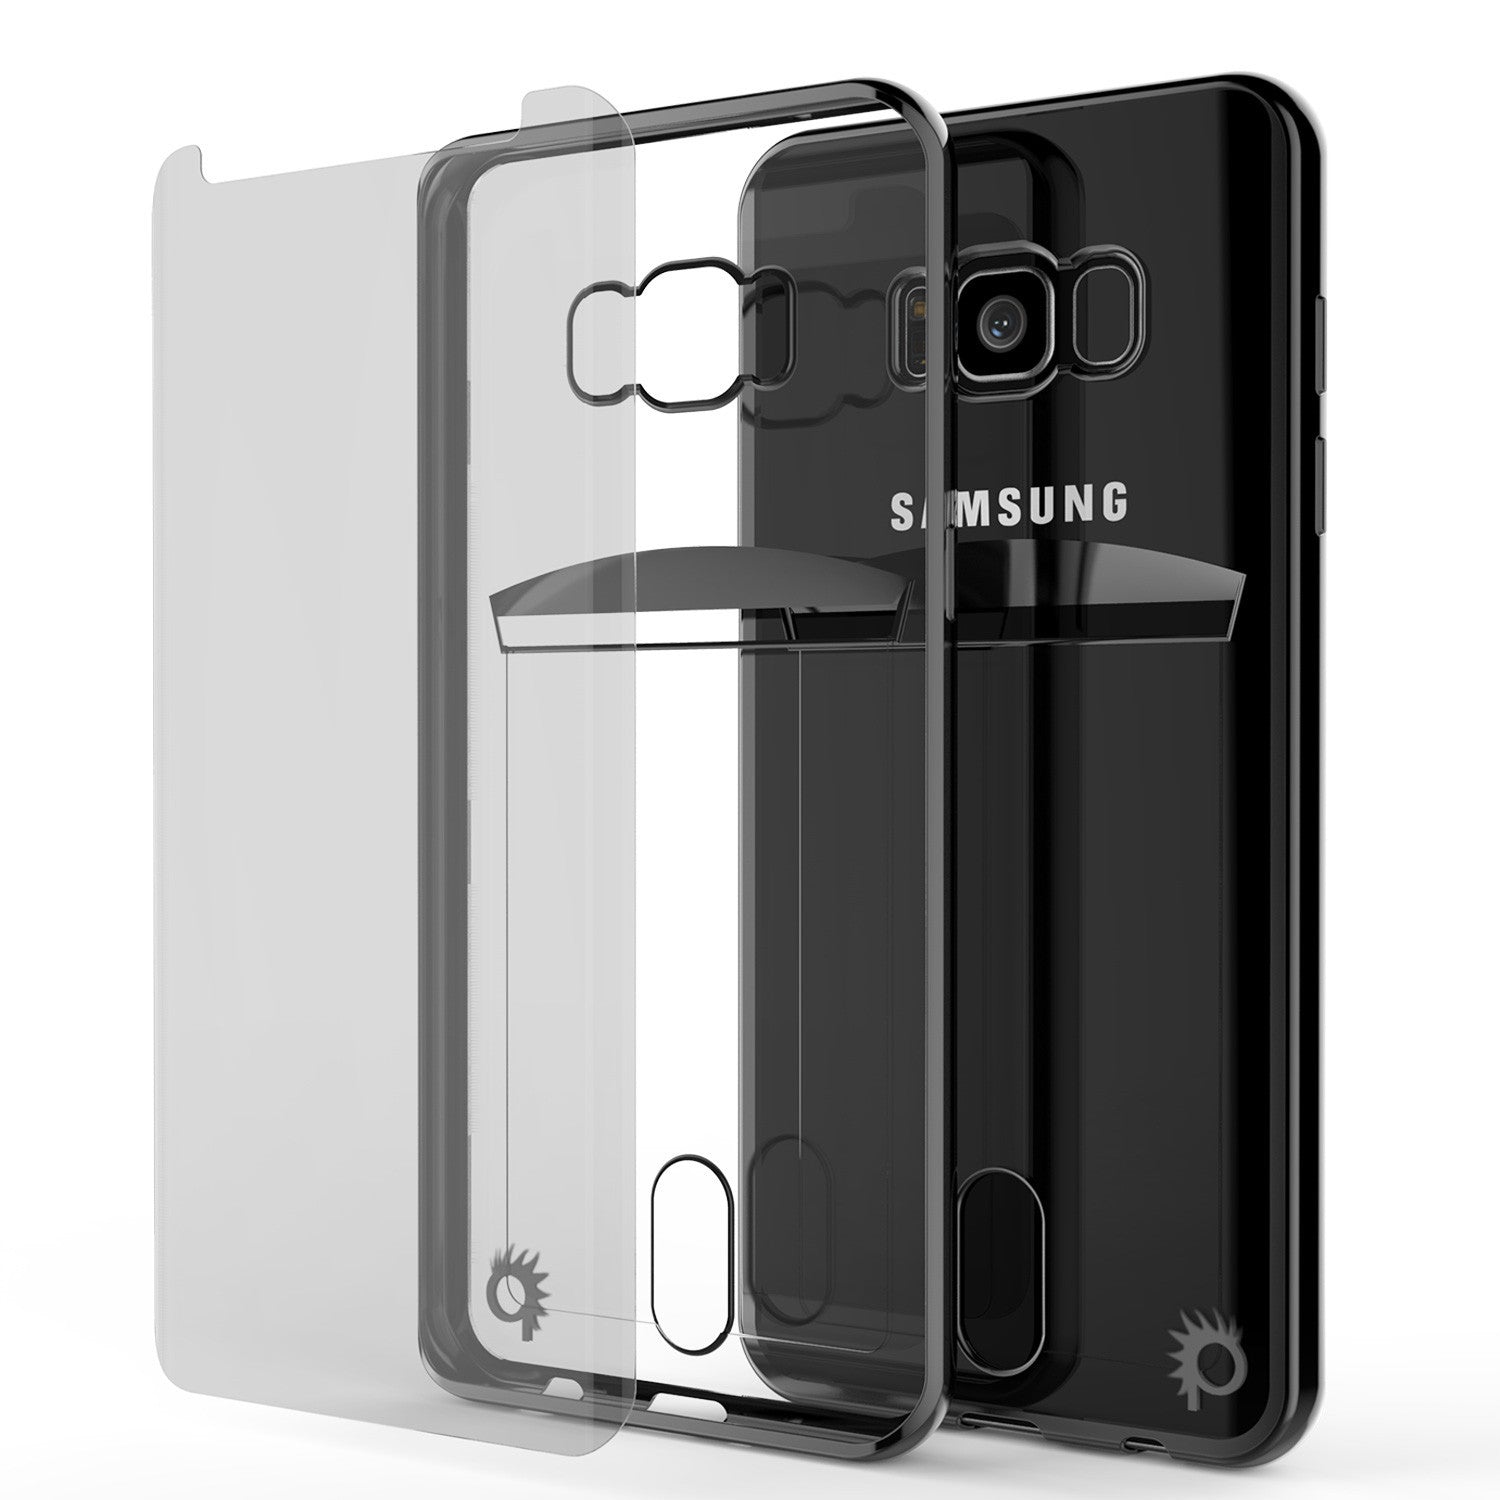 Galaxy S8 Plus Case, PUNKCASE® LUCID Black Series | Card Slot | SHIELD Screen Protector | Ultra fit